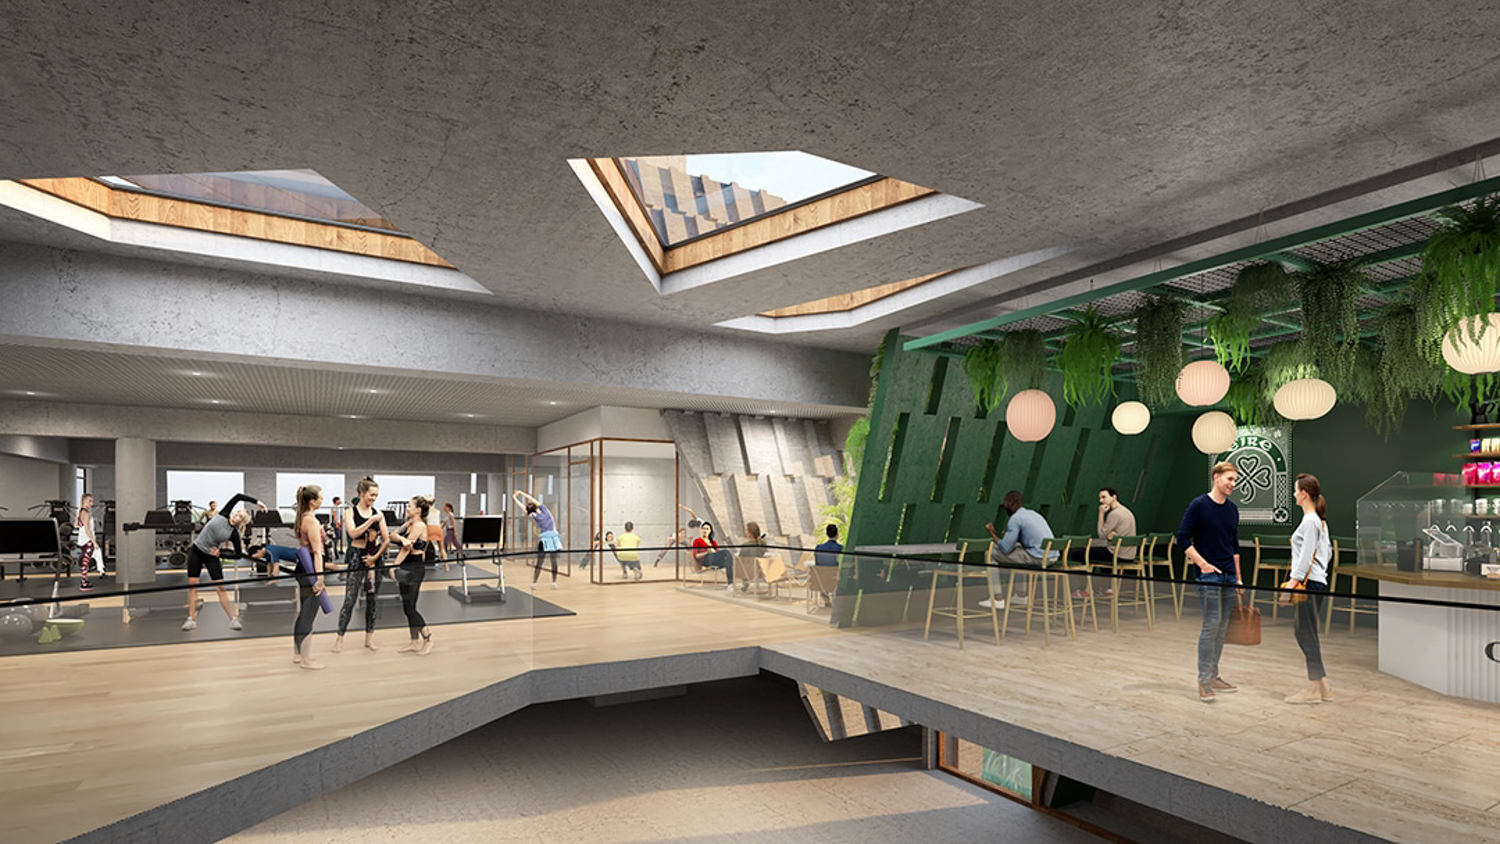 United Irish Cultural Center gym and cafe, design by Studio BANAA